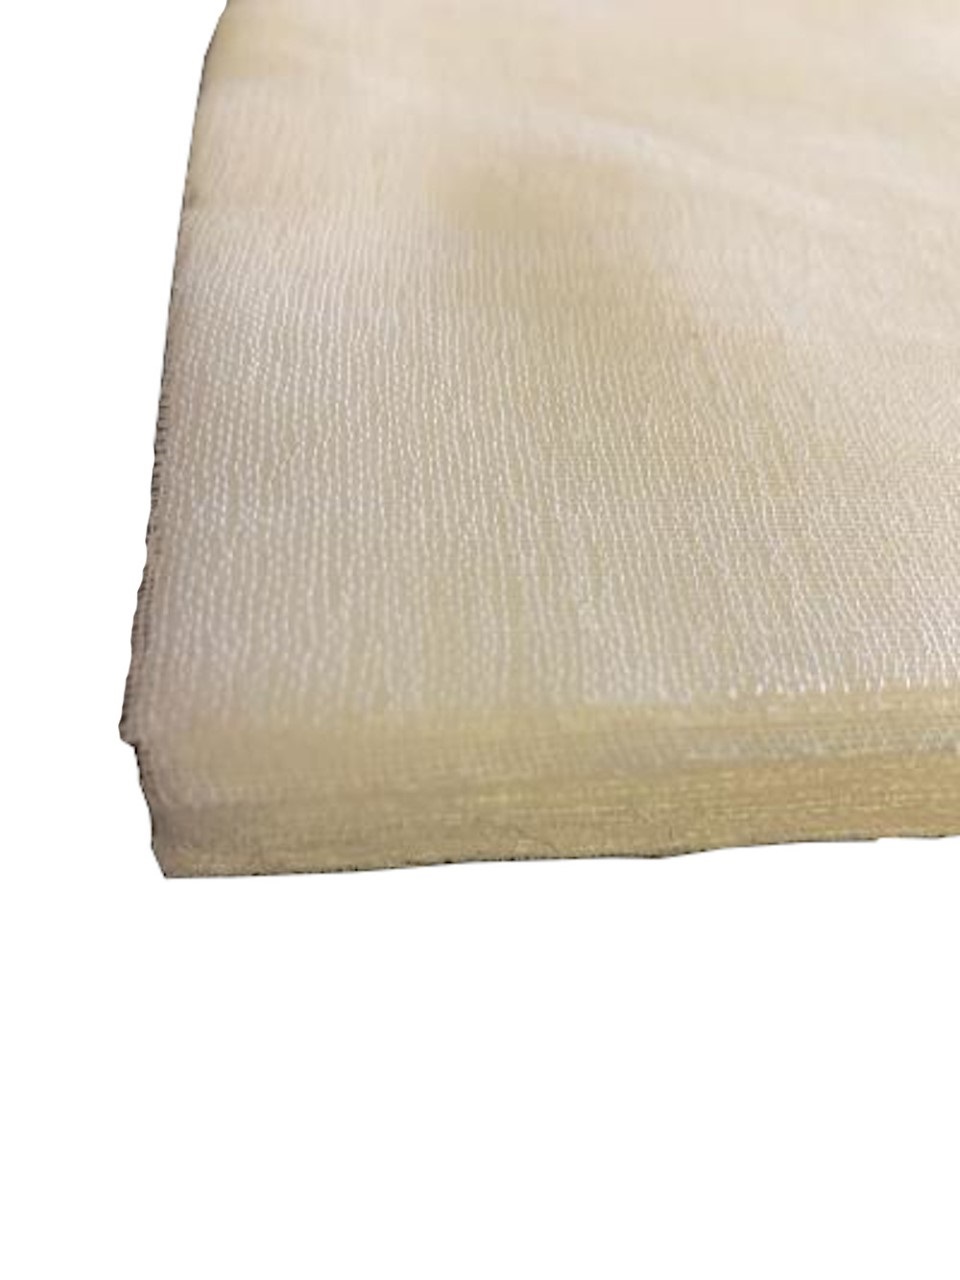 Grade 90 White Cheesecloth 24" x 24" Squares (100 Pack)